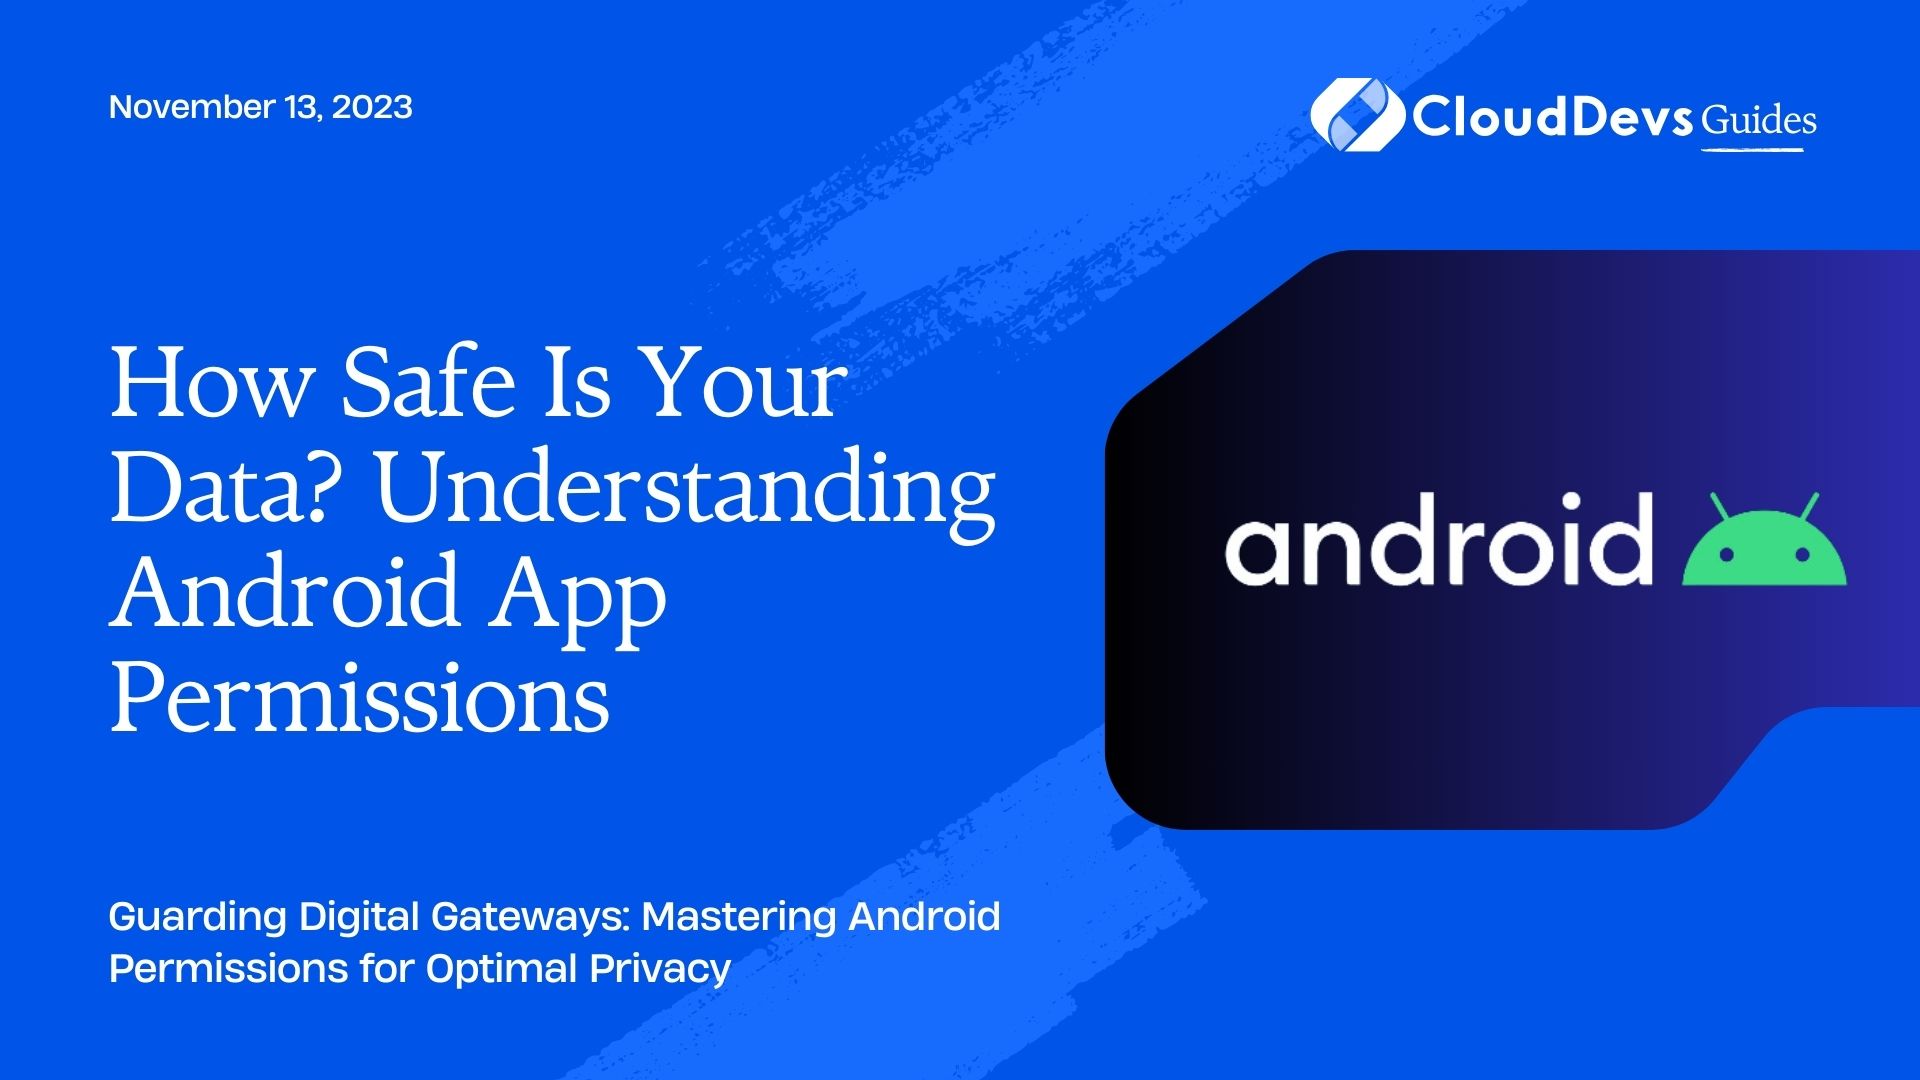 How Safe Is Your Data? Understanding Android App Permissions